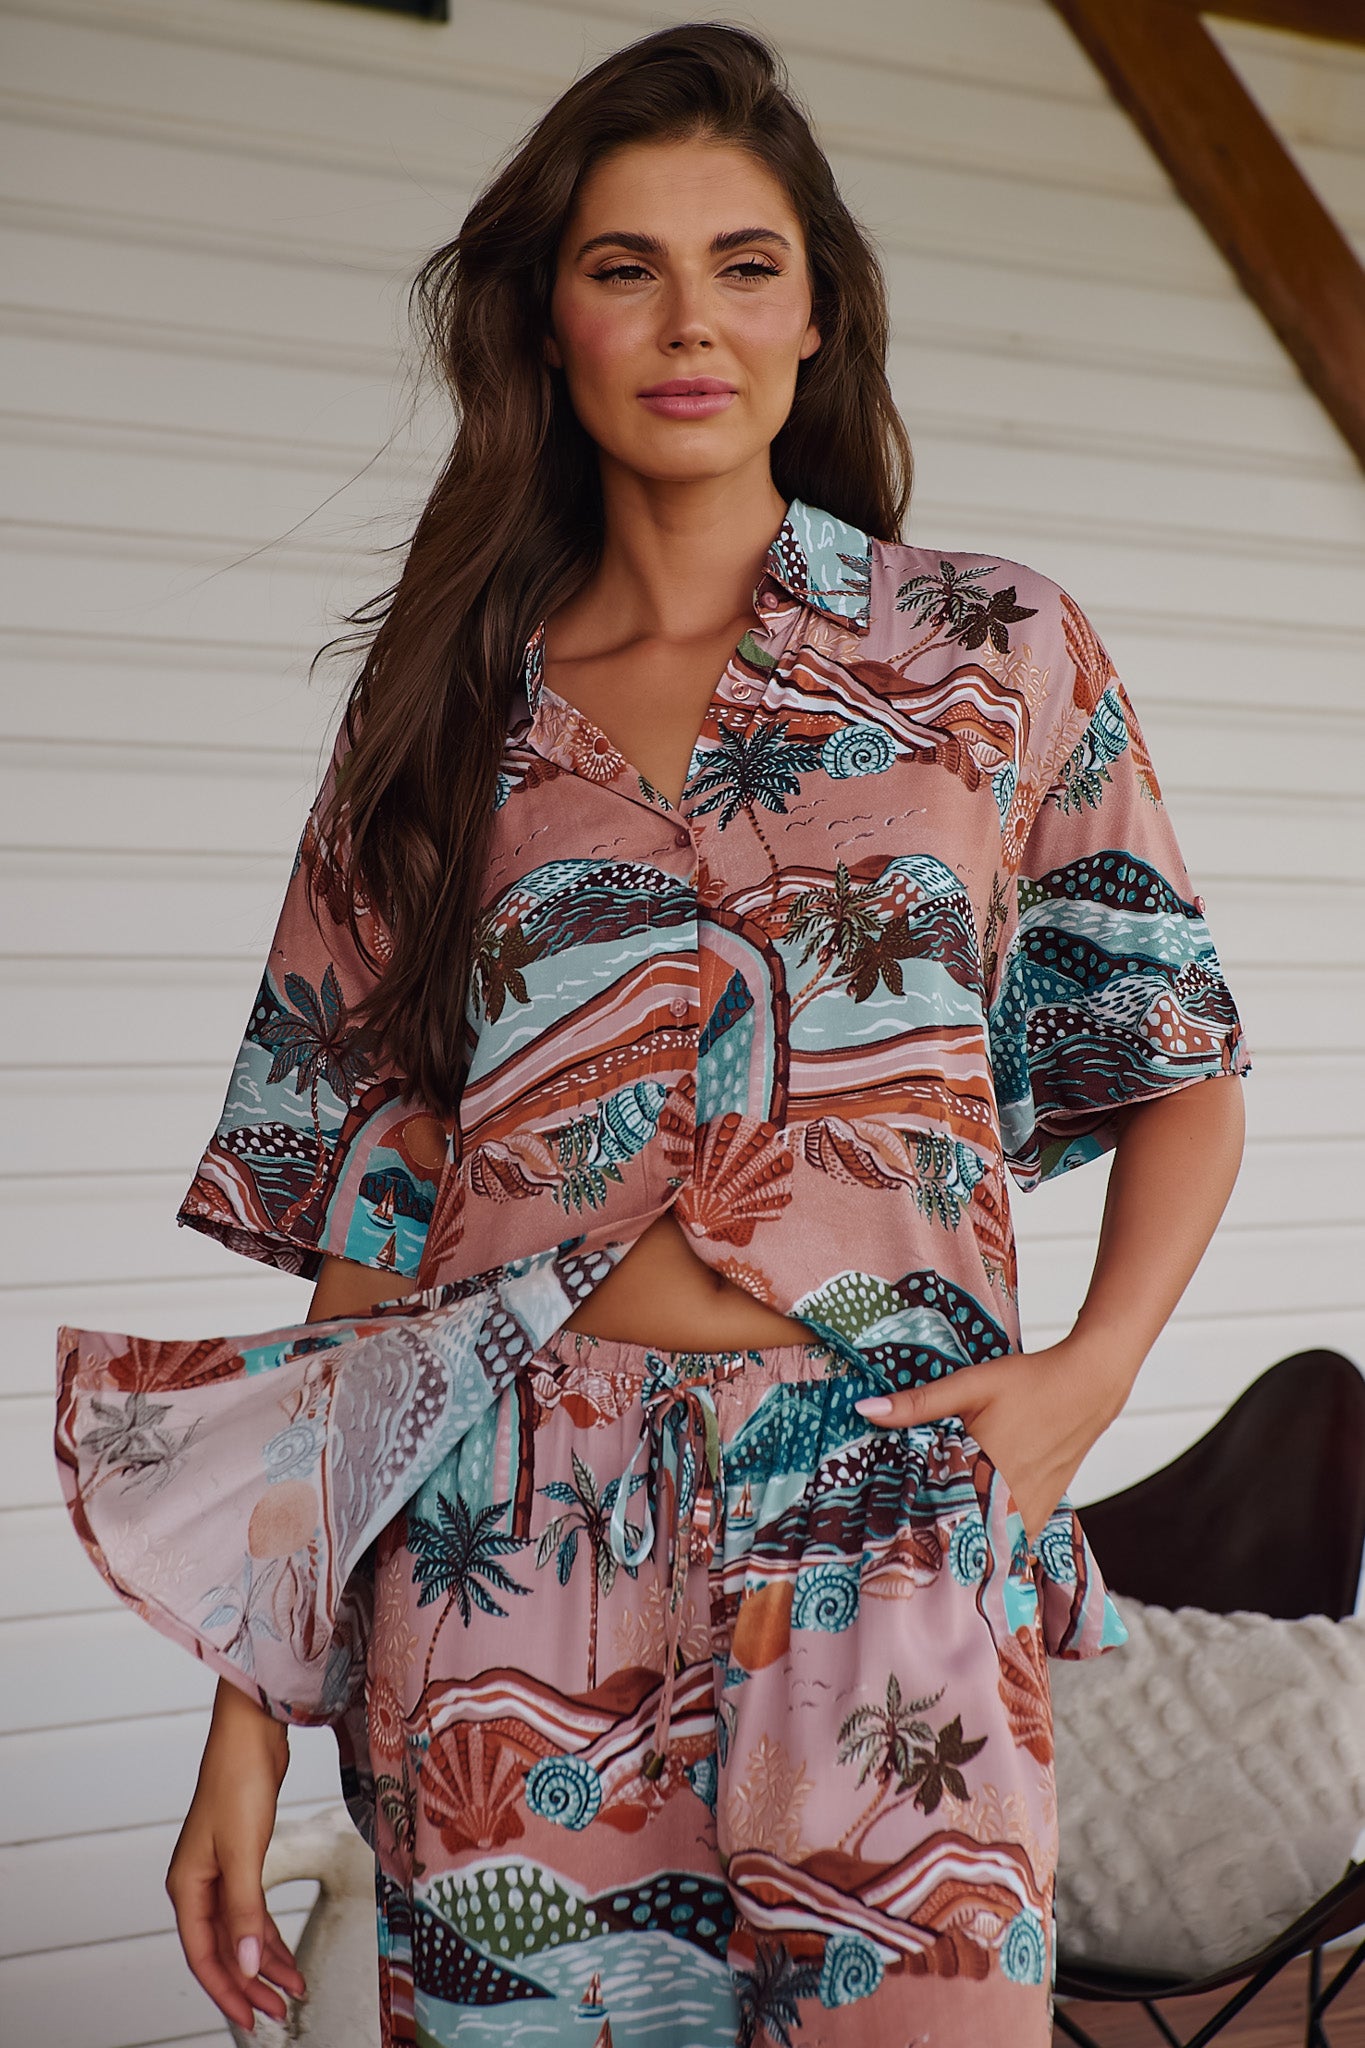 JAASE - Lola Shirt: High-Low Button Down Shirt in Lakeside Serenity Print